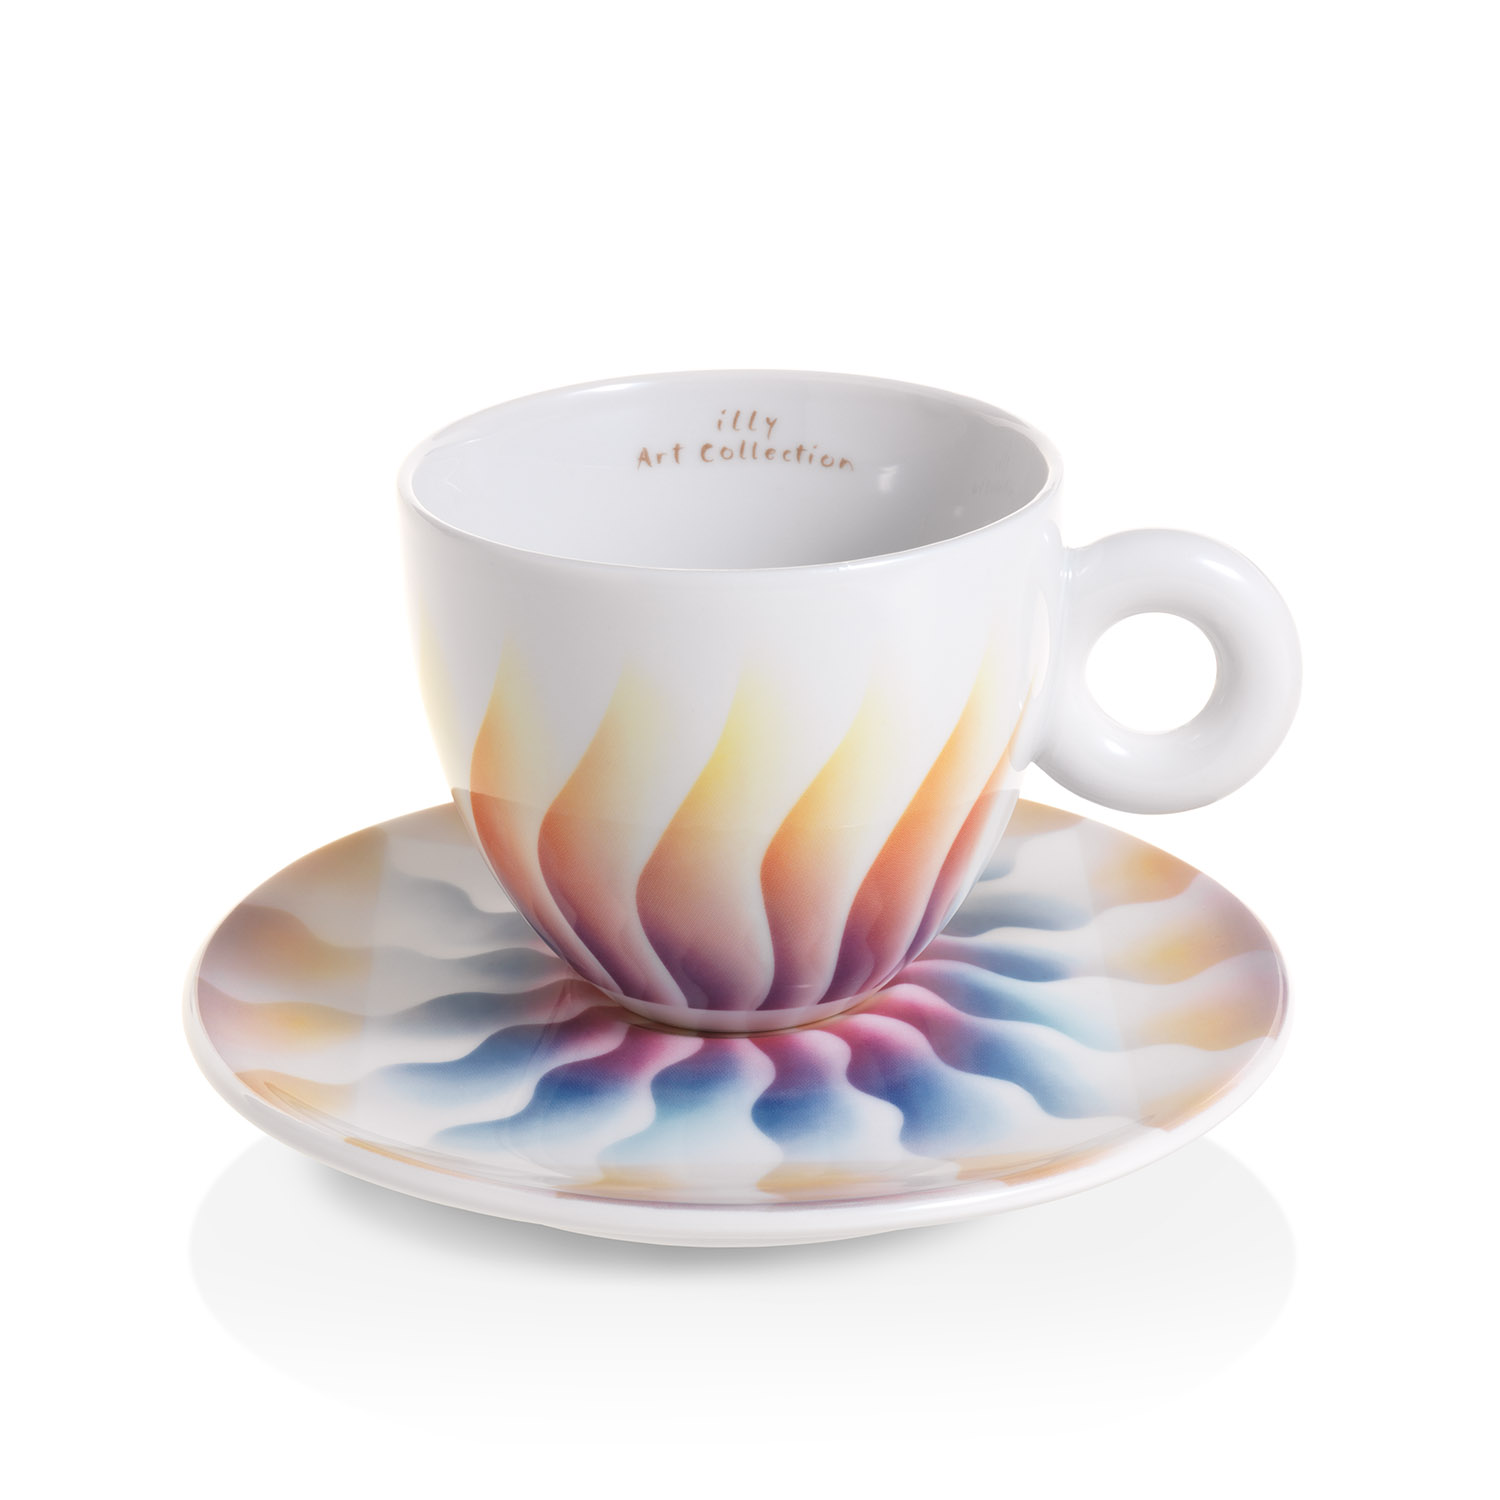 Set of 4 cappuccino cups - the Judy Chicago illy Art Collection